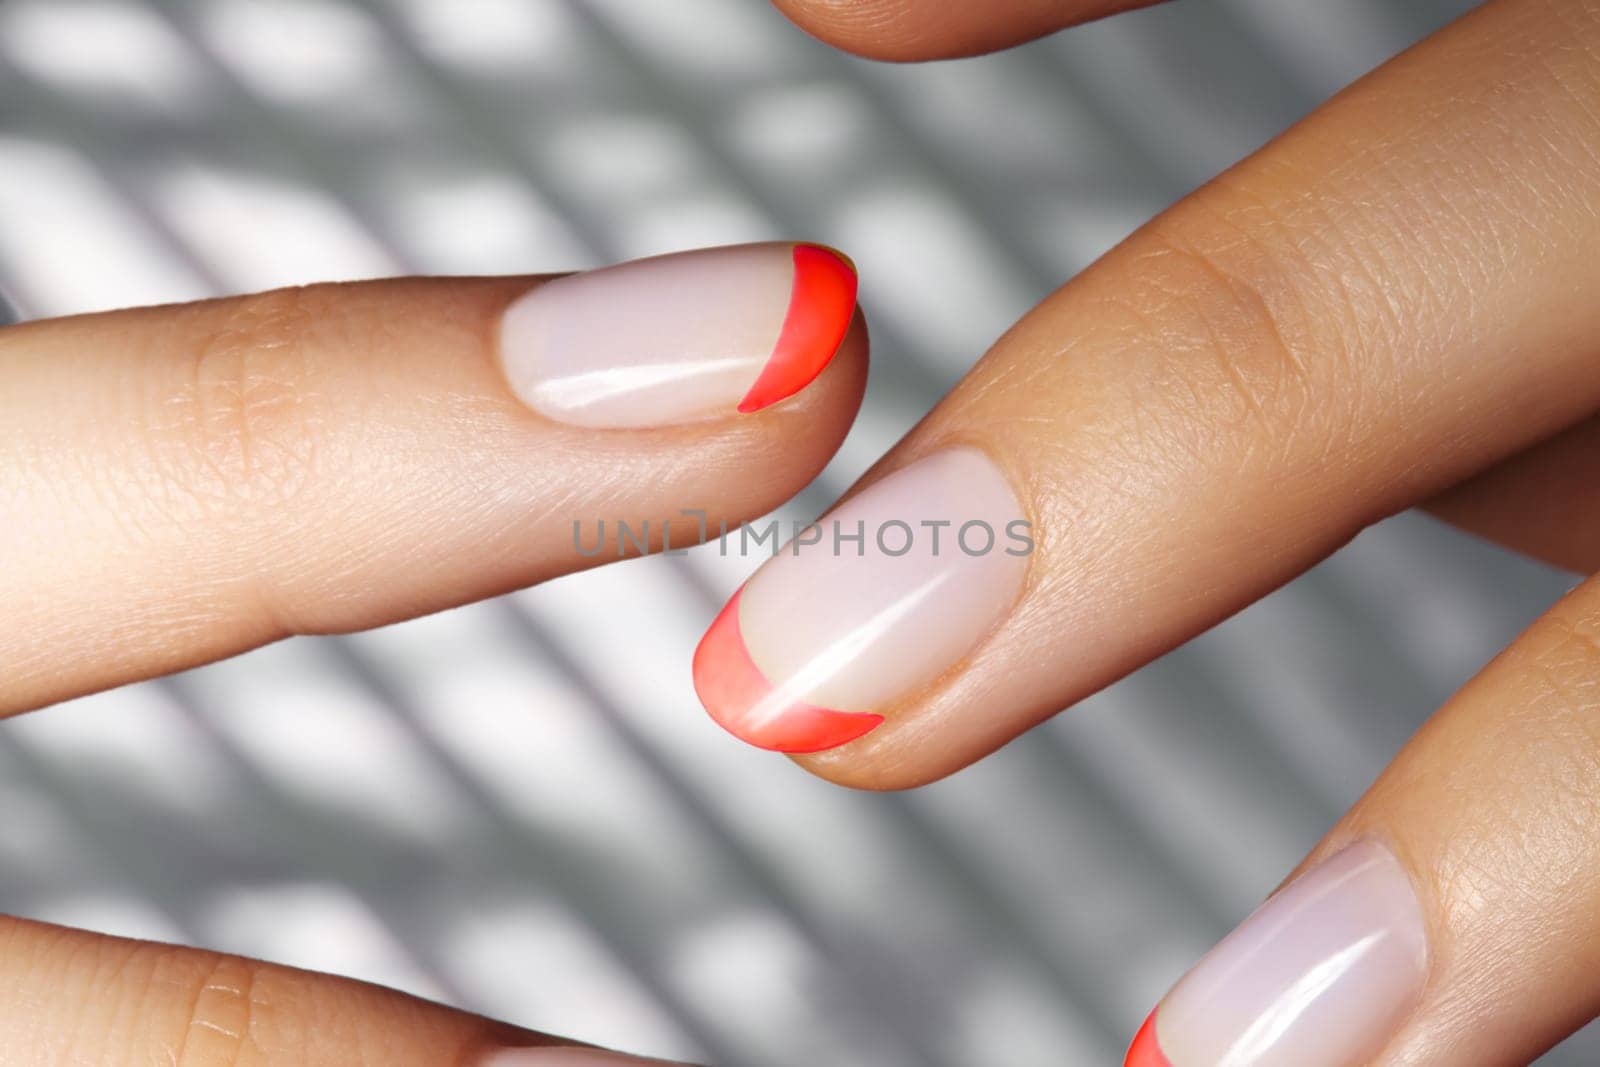 Hands with Trendy Bright Red French Manicure on Geometric Background. Nails Art Design. Close-up of Female Hands with Fashion Neon Nails on Silver Striped Print Background